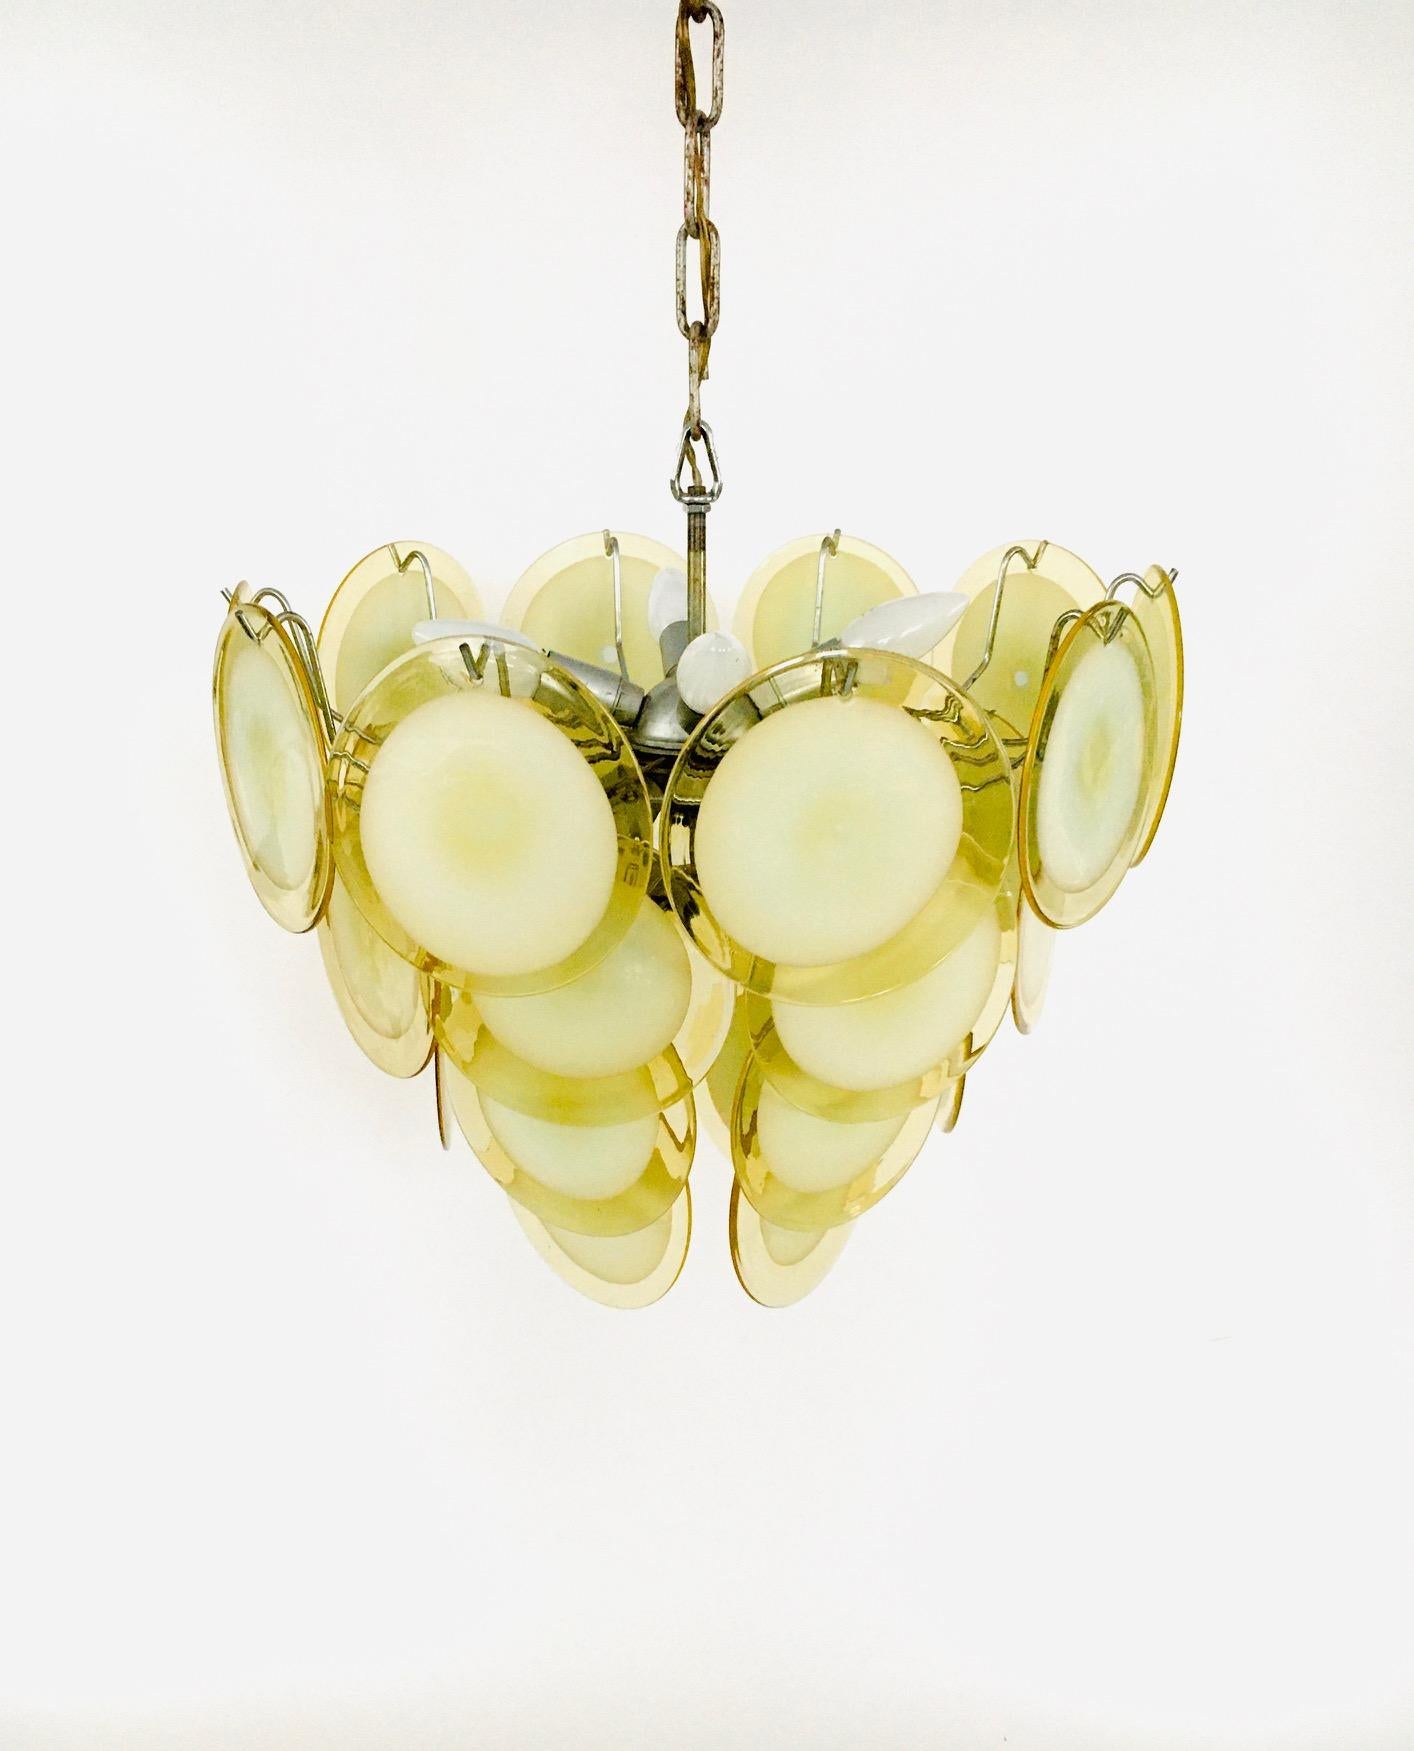 Midcentury Italian Design Murano Glass Disc Chandelier by Vistosi for Venini In Good Condition For Sale In Oud-Turnhout, VAN